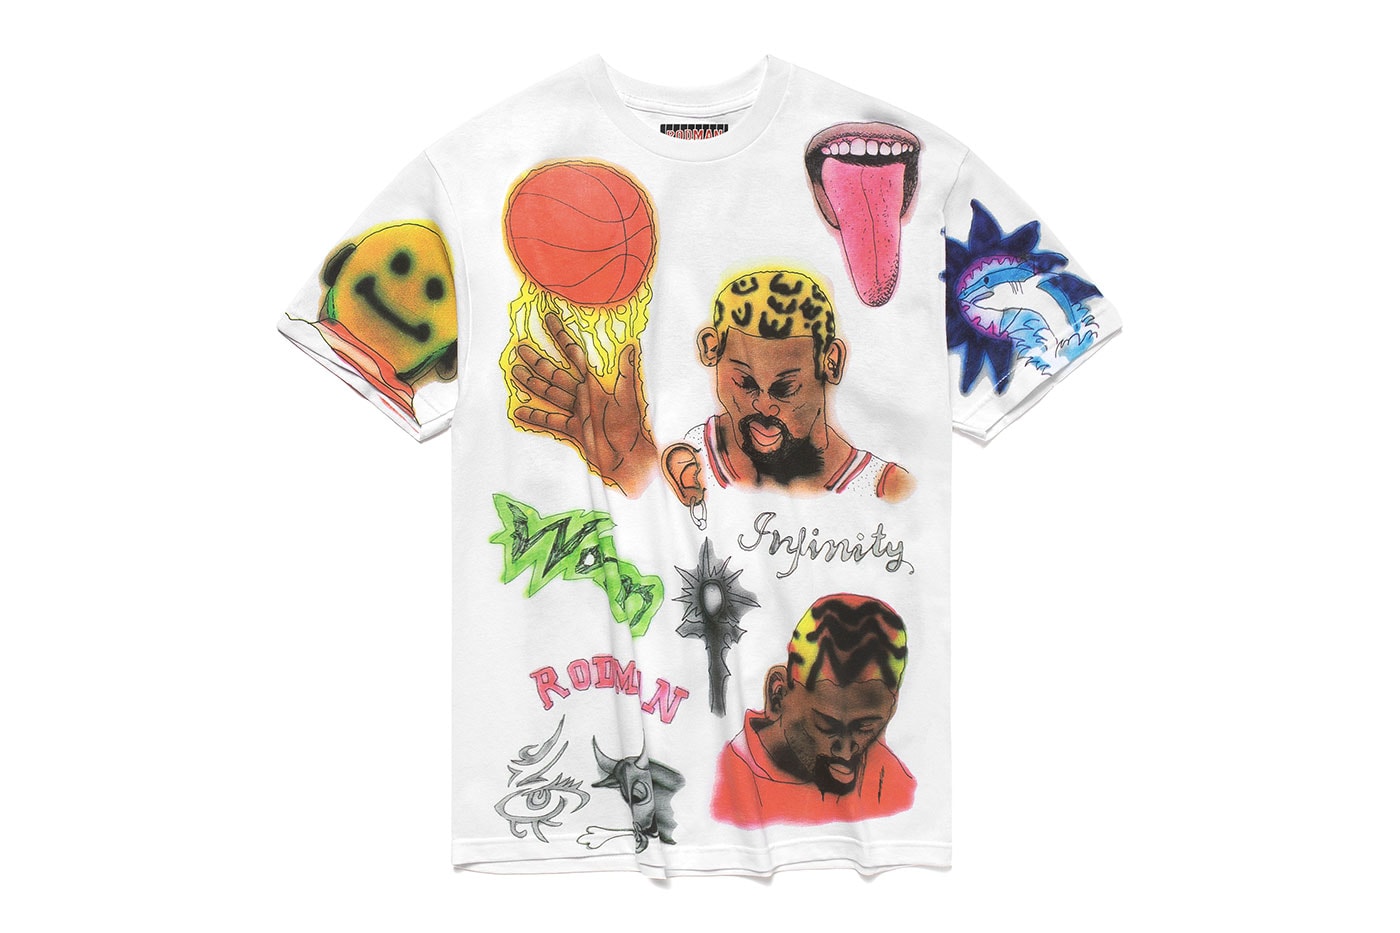 MA®KET Launches a Dennis Rodman Collection pink leopard print hoodies and shorts,  photoshoot tees, poster sets, jerseys bucket hats sweatpants woven blankets and Champion basketball shorts apparel home goods doodles pillows smiley face bridal gown t shirt trucker hat release info date price